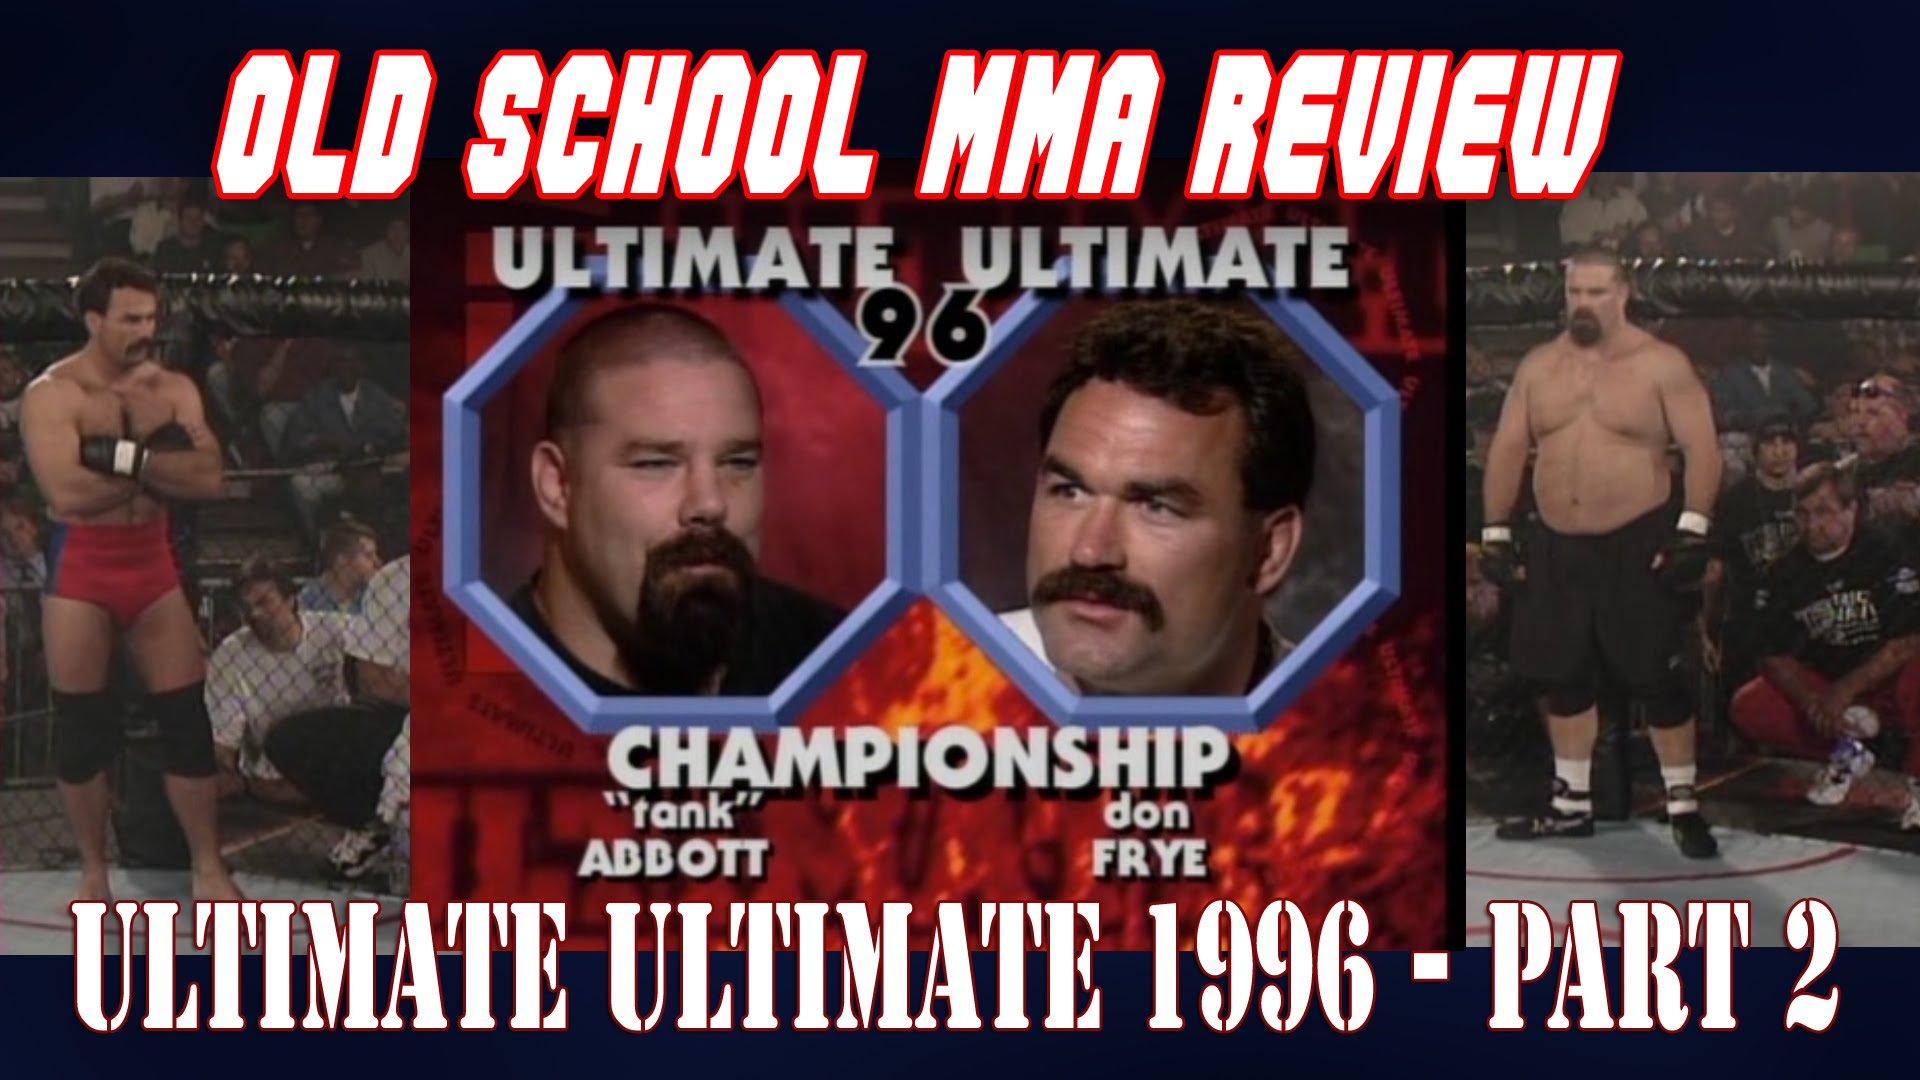 Old School MMA Review - UFC Ultimate Ultimate 1996, Part 2 MMA Video